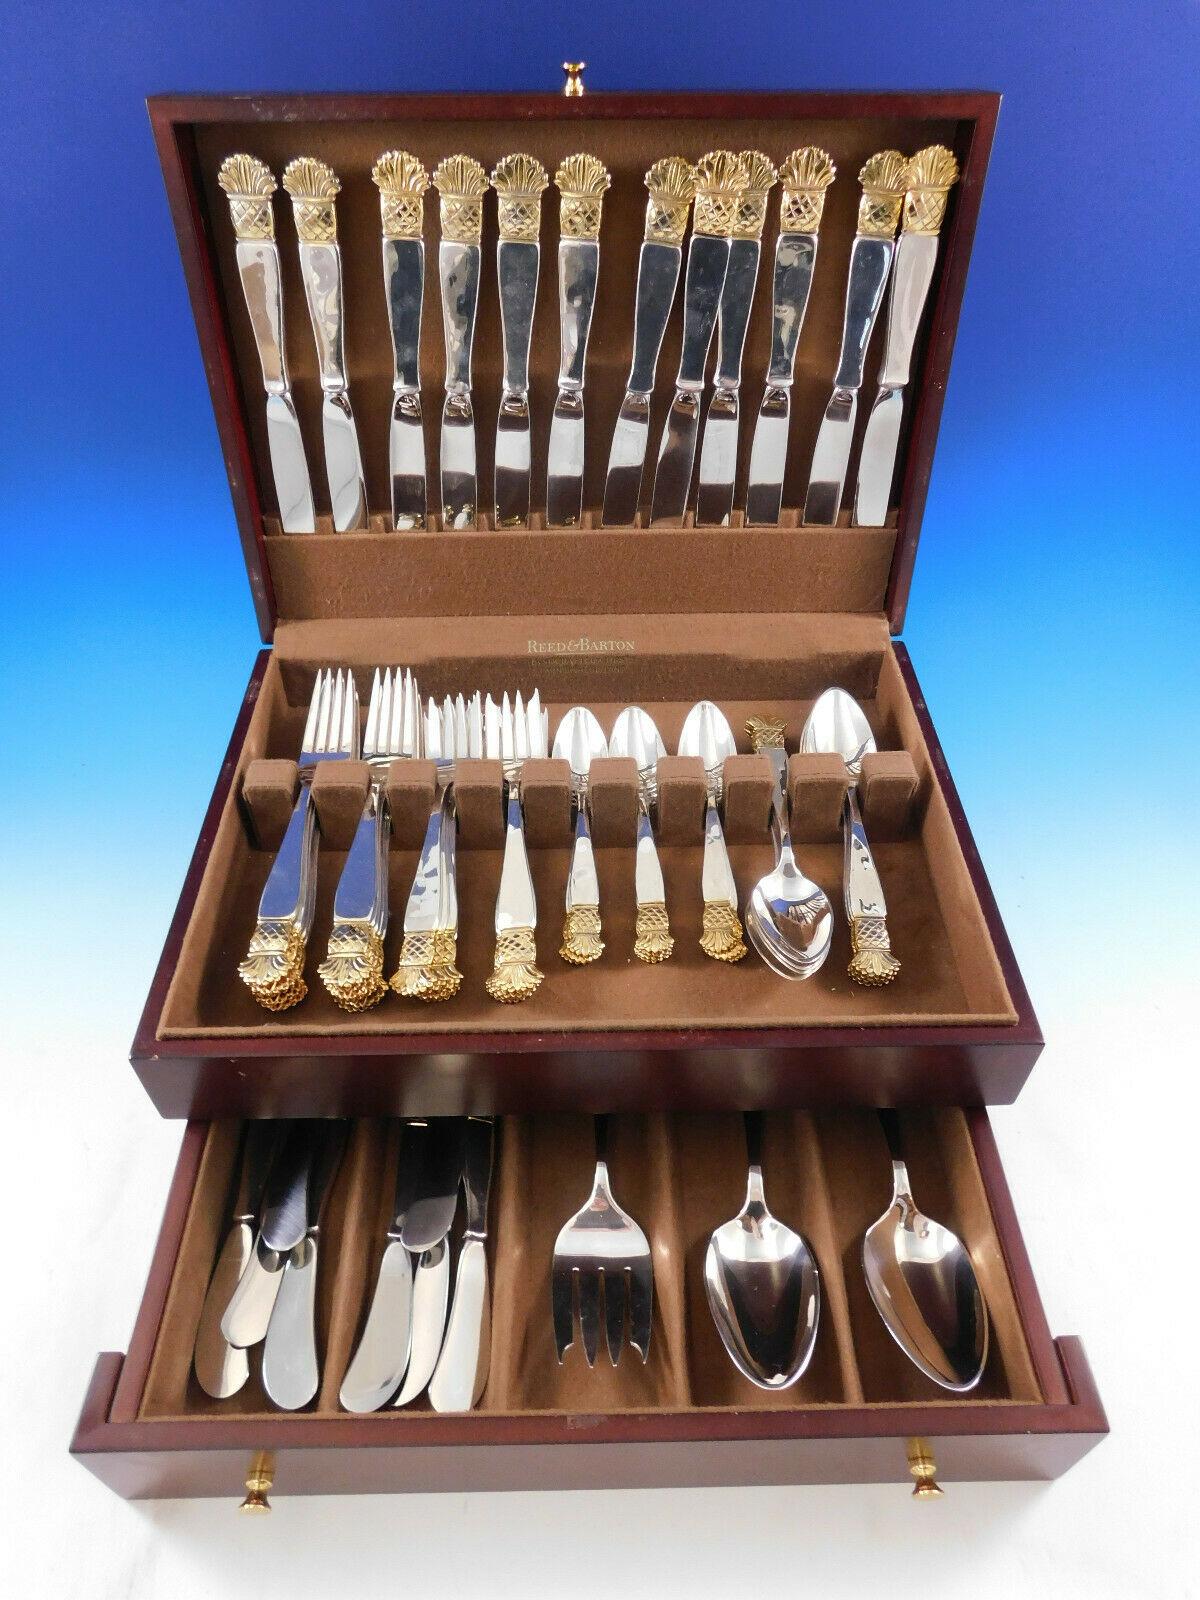 Old Newbury Crafters silver is genuinely hand-made and wonderfully heavy, the machine cannot match the quality, durability, look and feel of handmade silver. The subtle hammered finish shows silver at its finest. 

Superb 67 piece dinner size